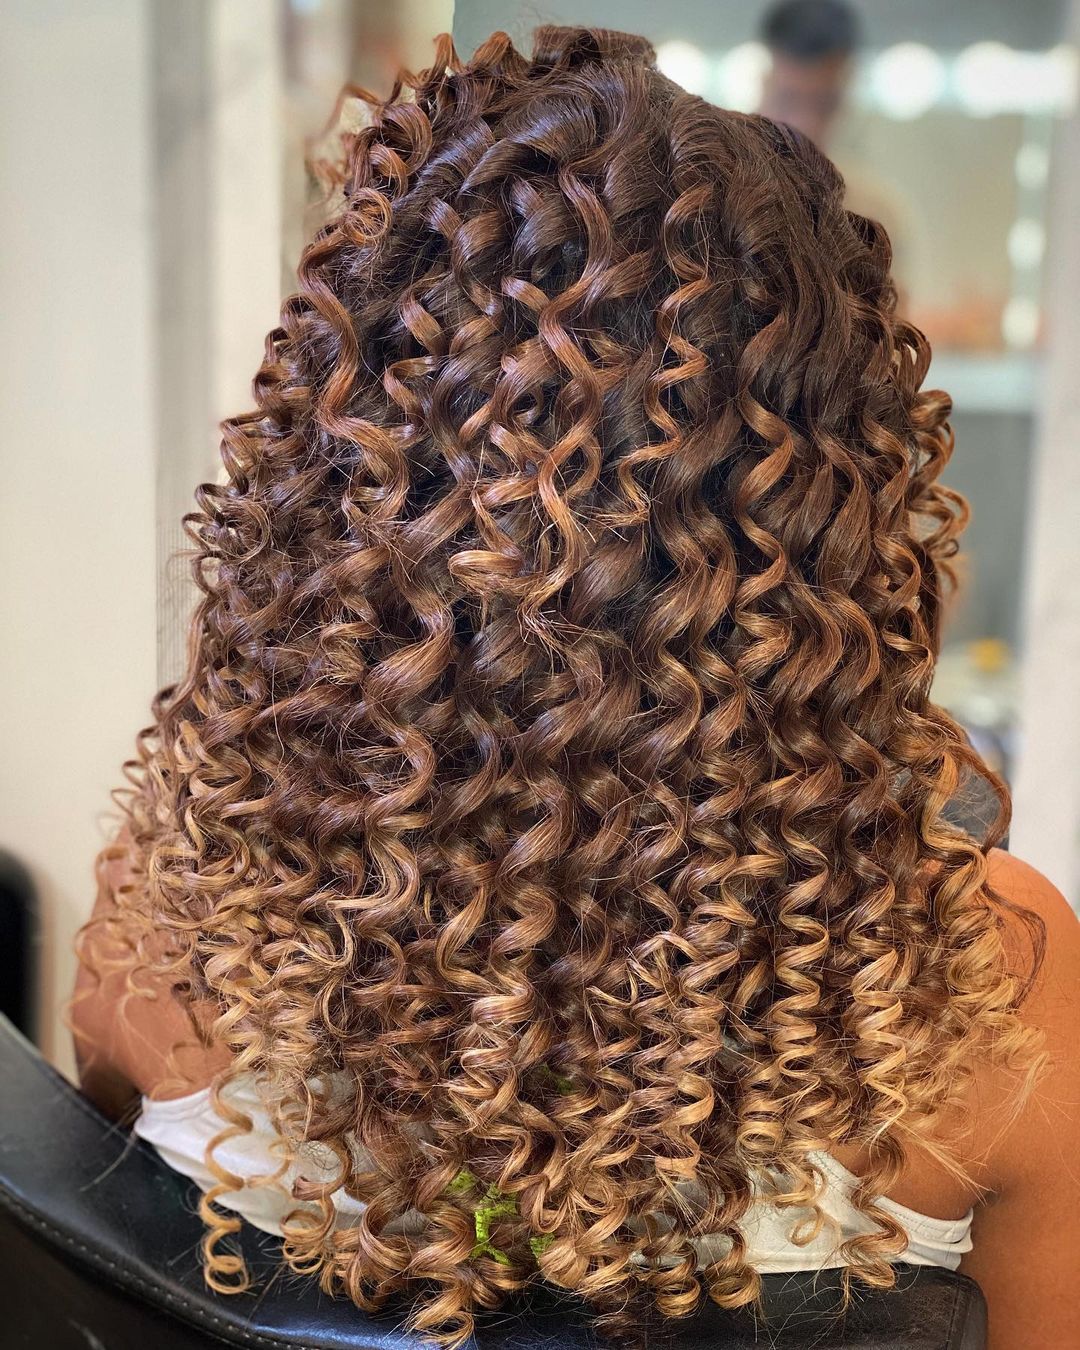 24 Natural Curly Hair Looks You Are Going To Love